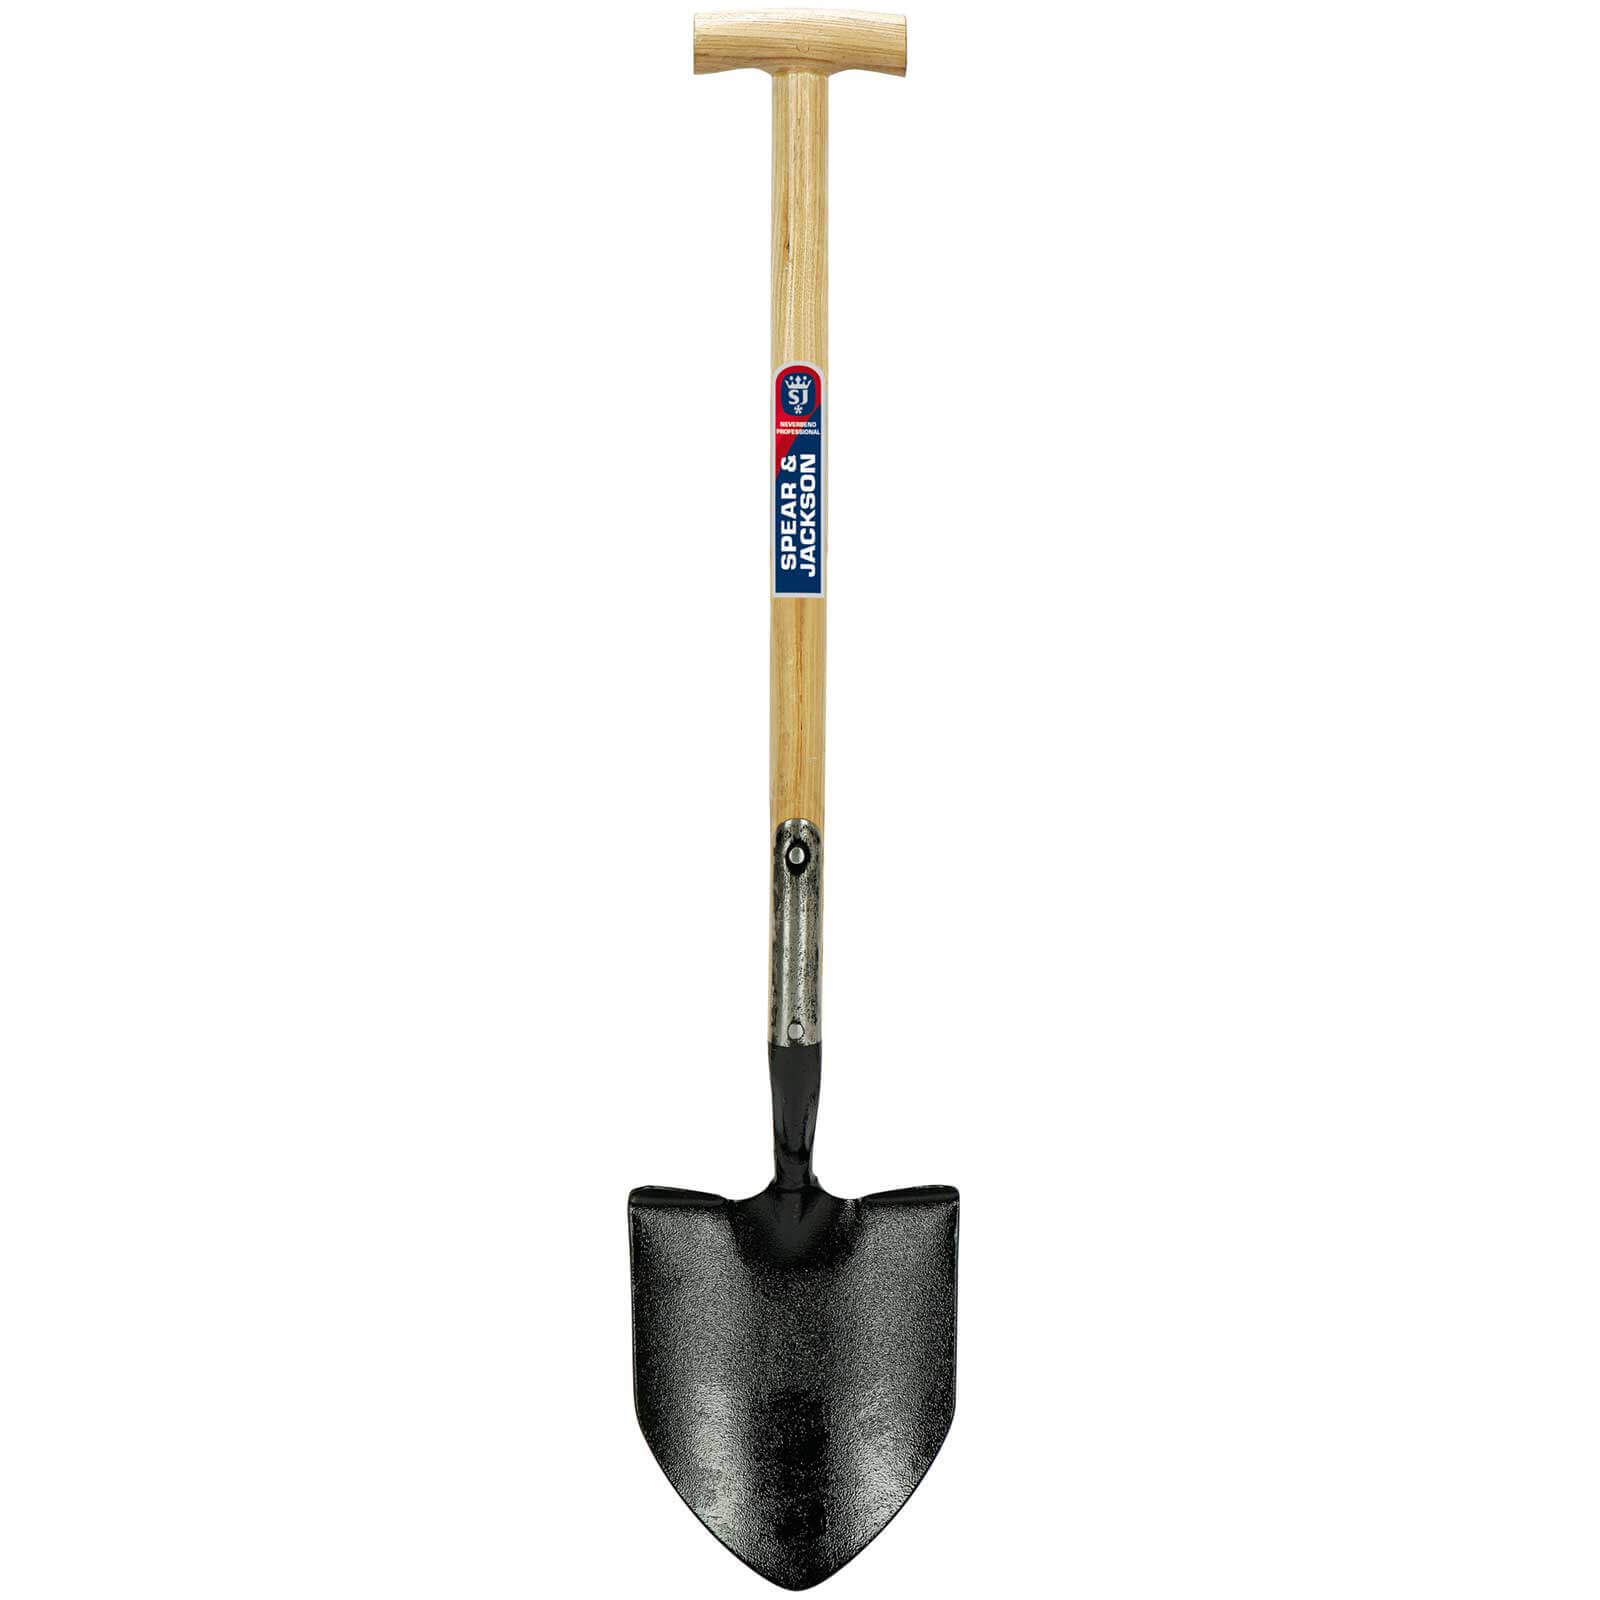 Image of Spear and Jackson Neverbend Strapped General Service Treaded Contractors Shovel